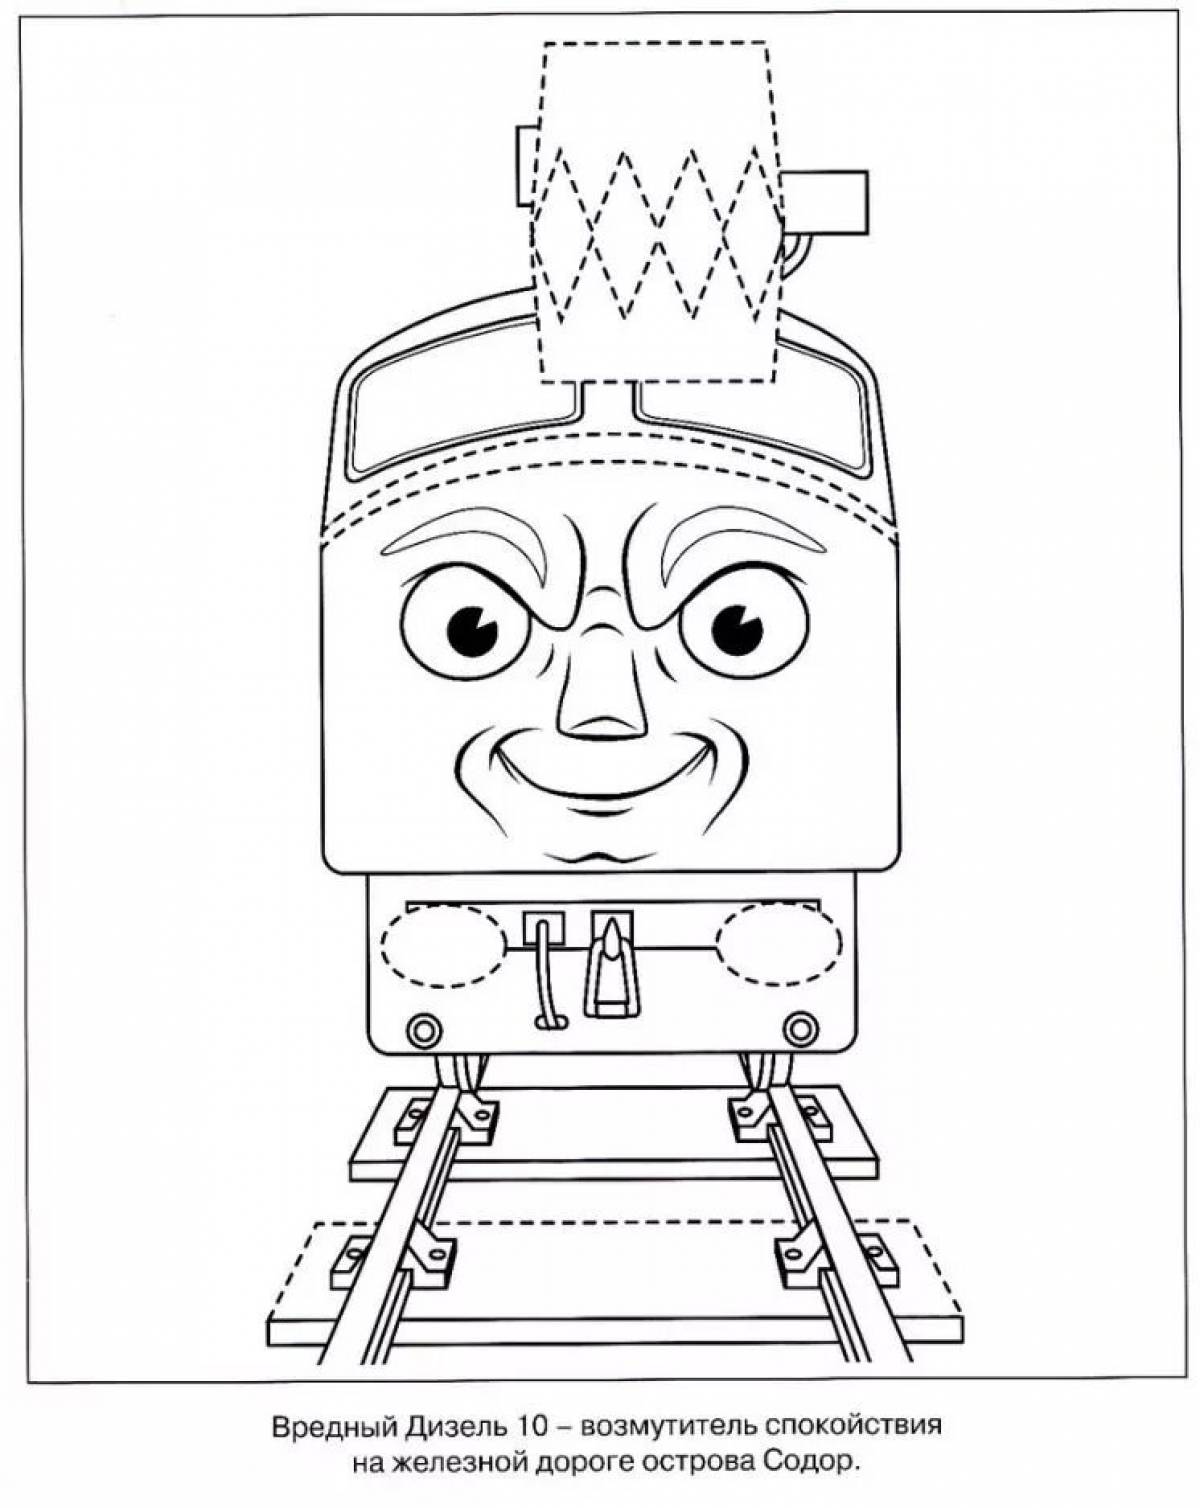 Thomas the spider coloring book